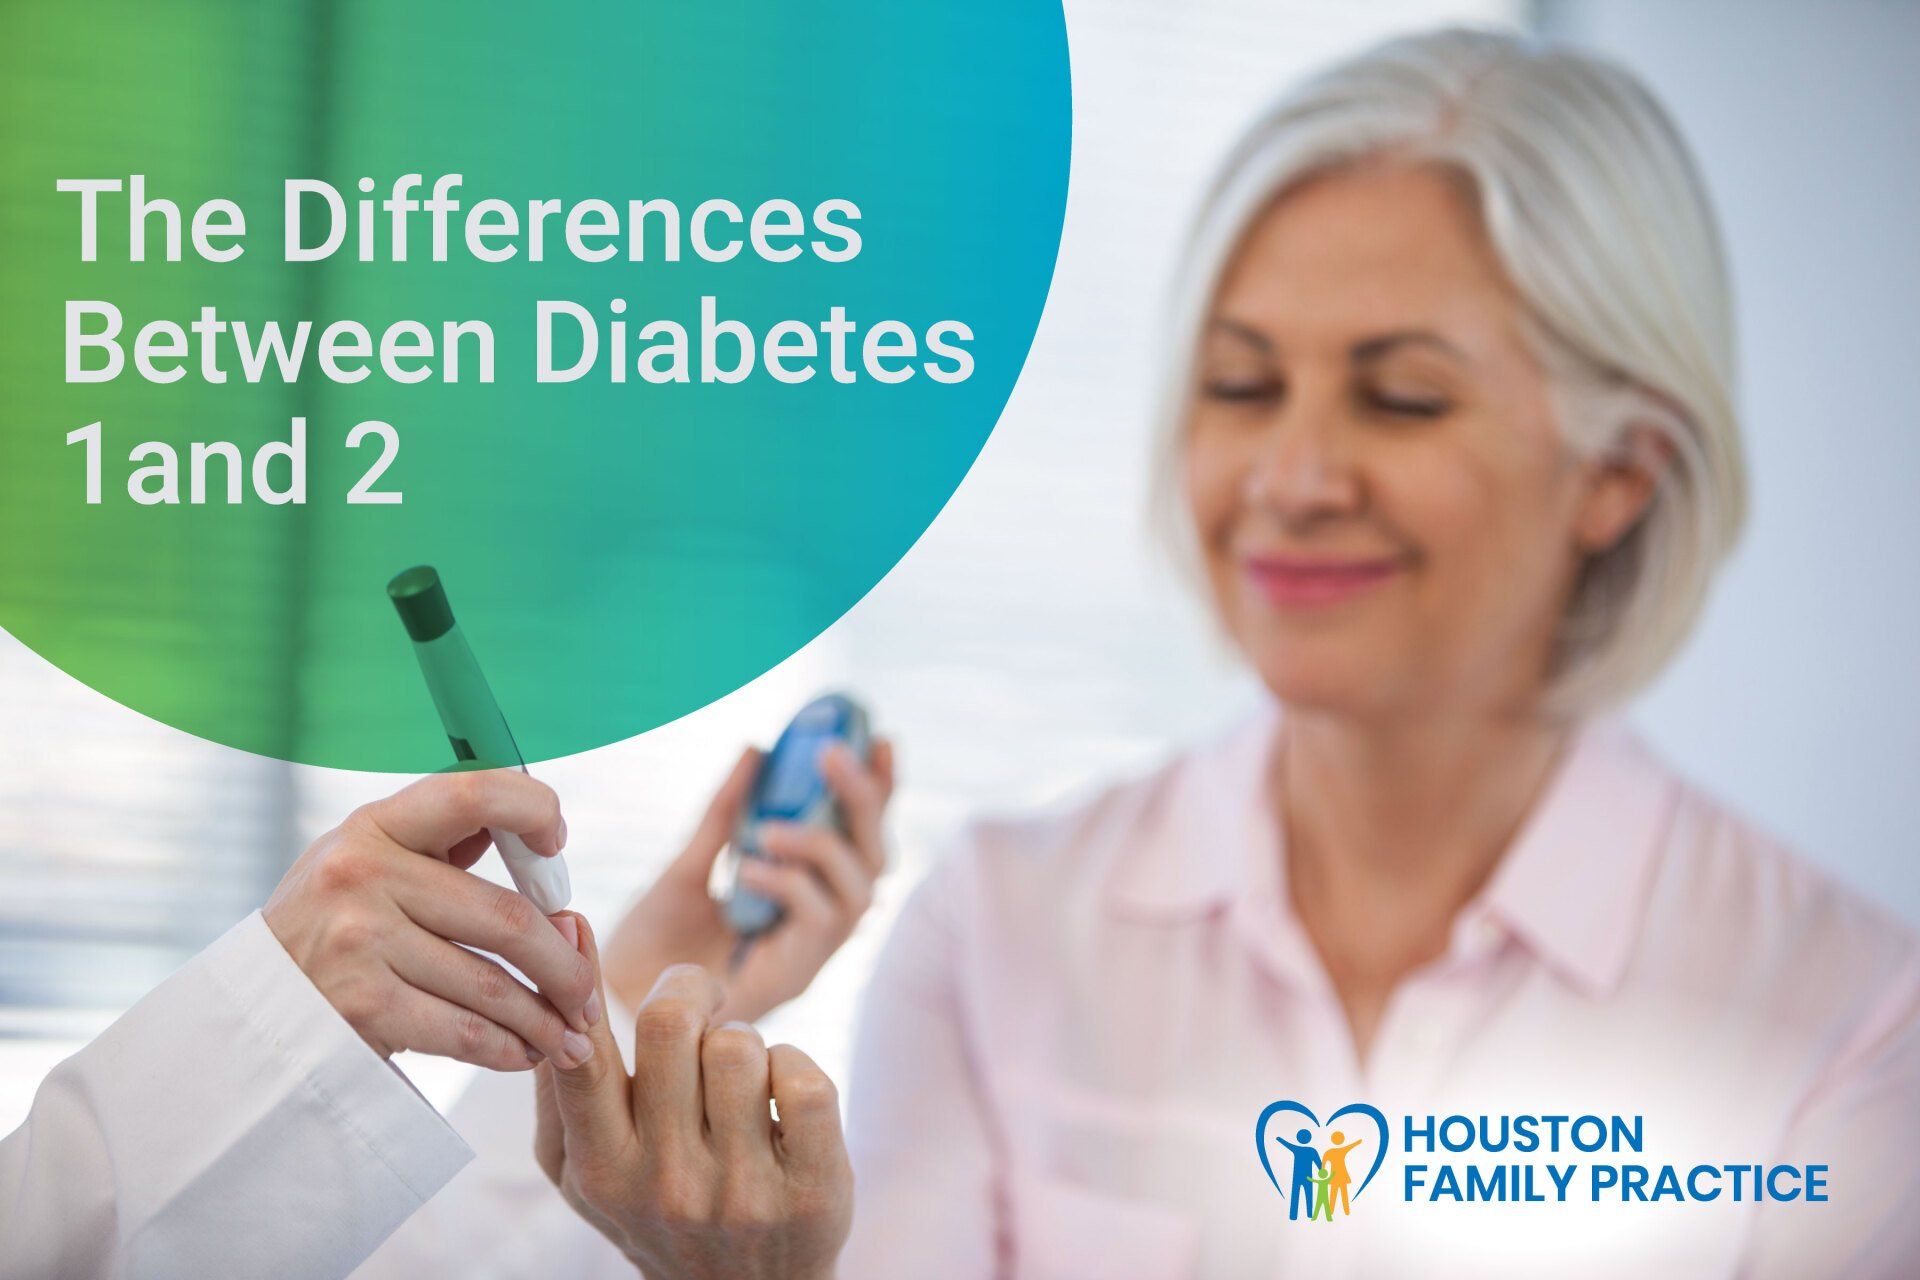 The Differences Between Diabetes 1 and 2